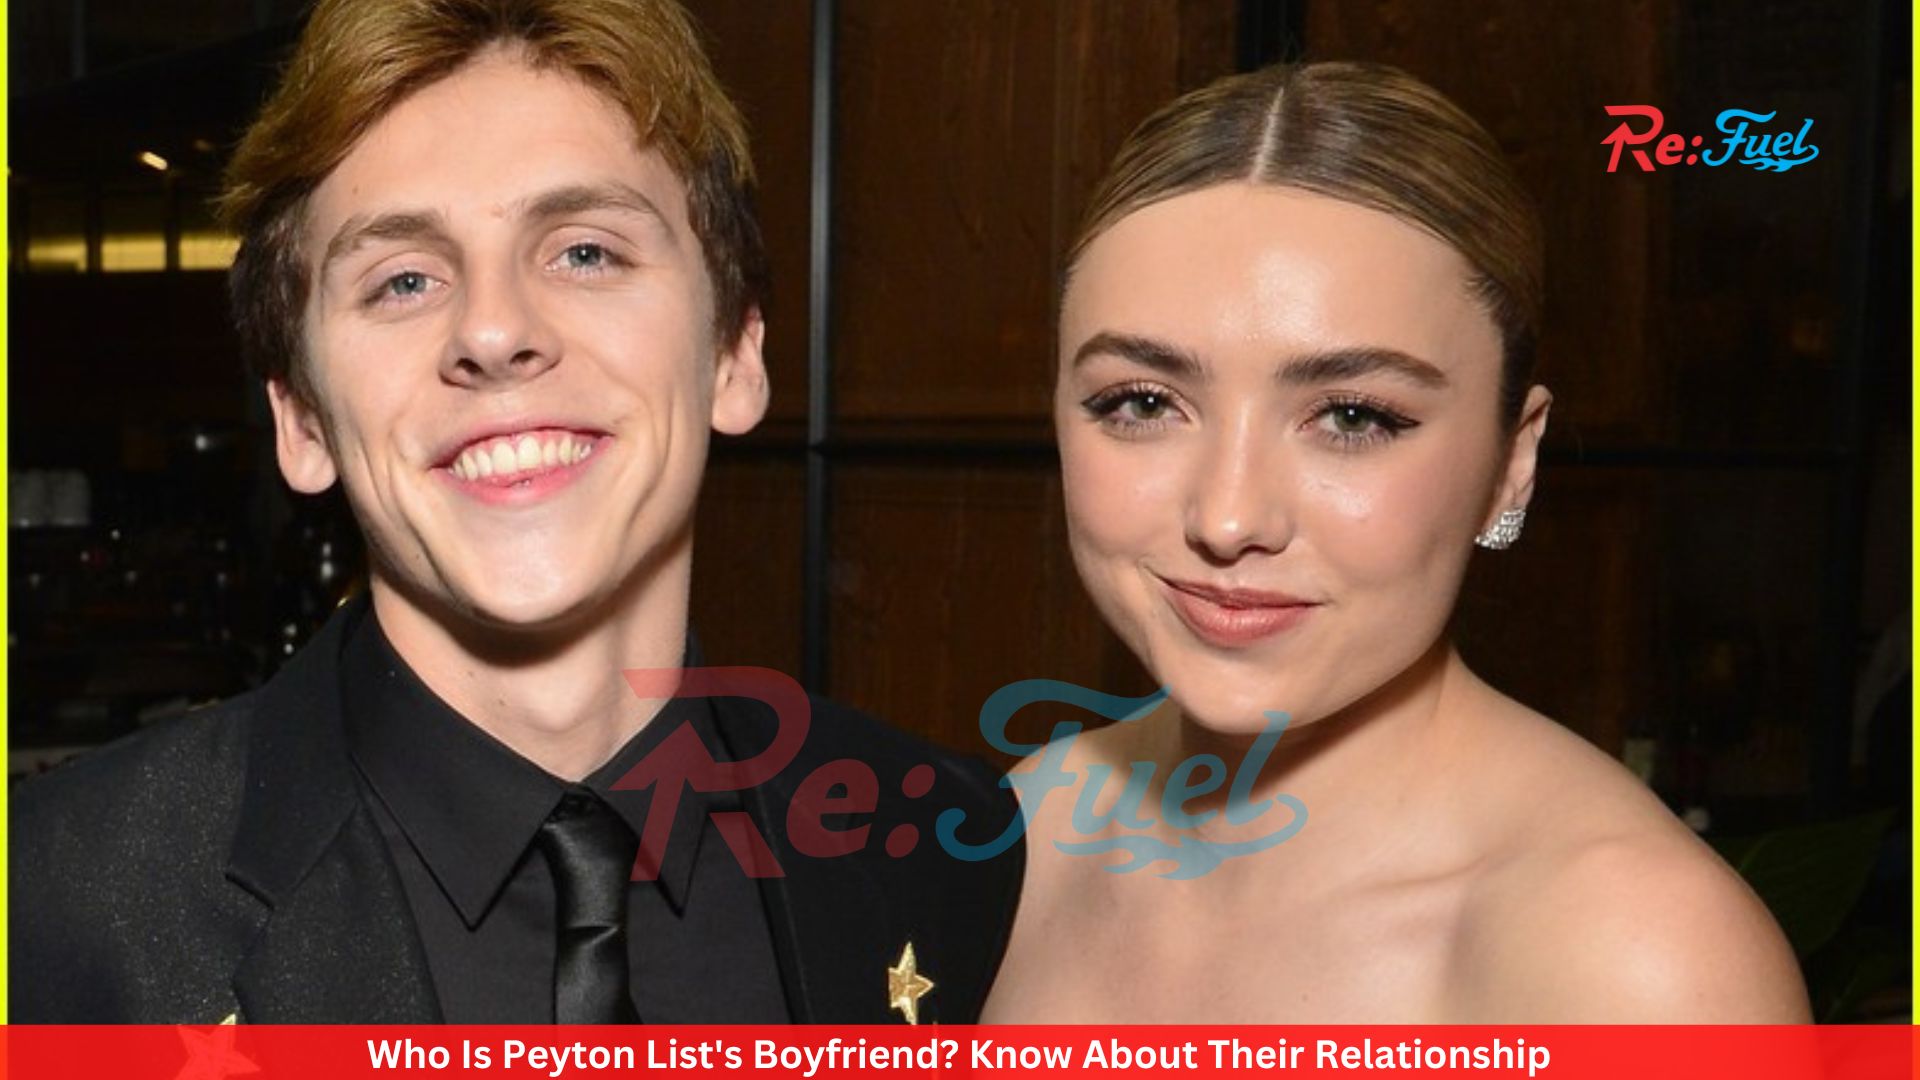 Who Is Peyton List's Boyfriend? Know About Their Relationship